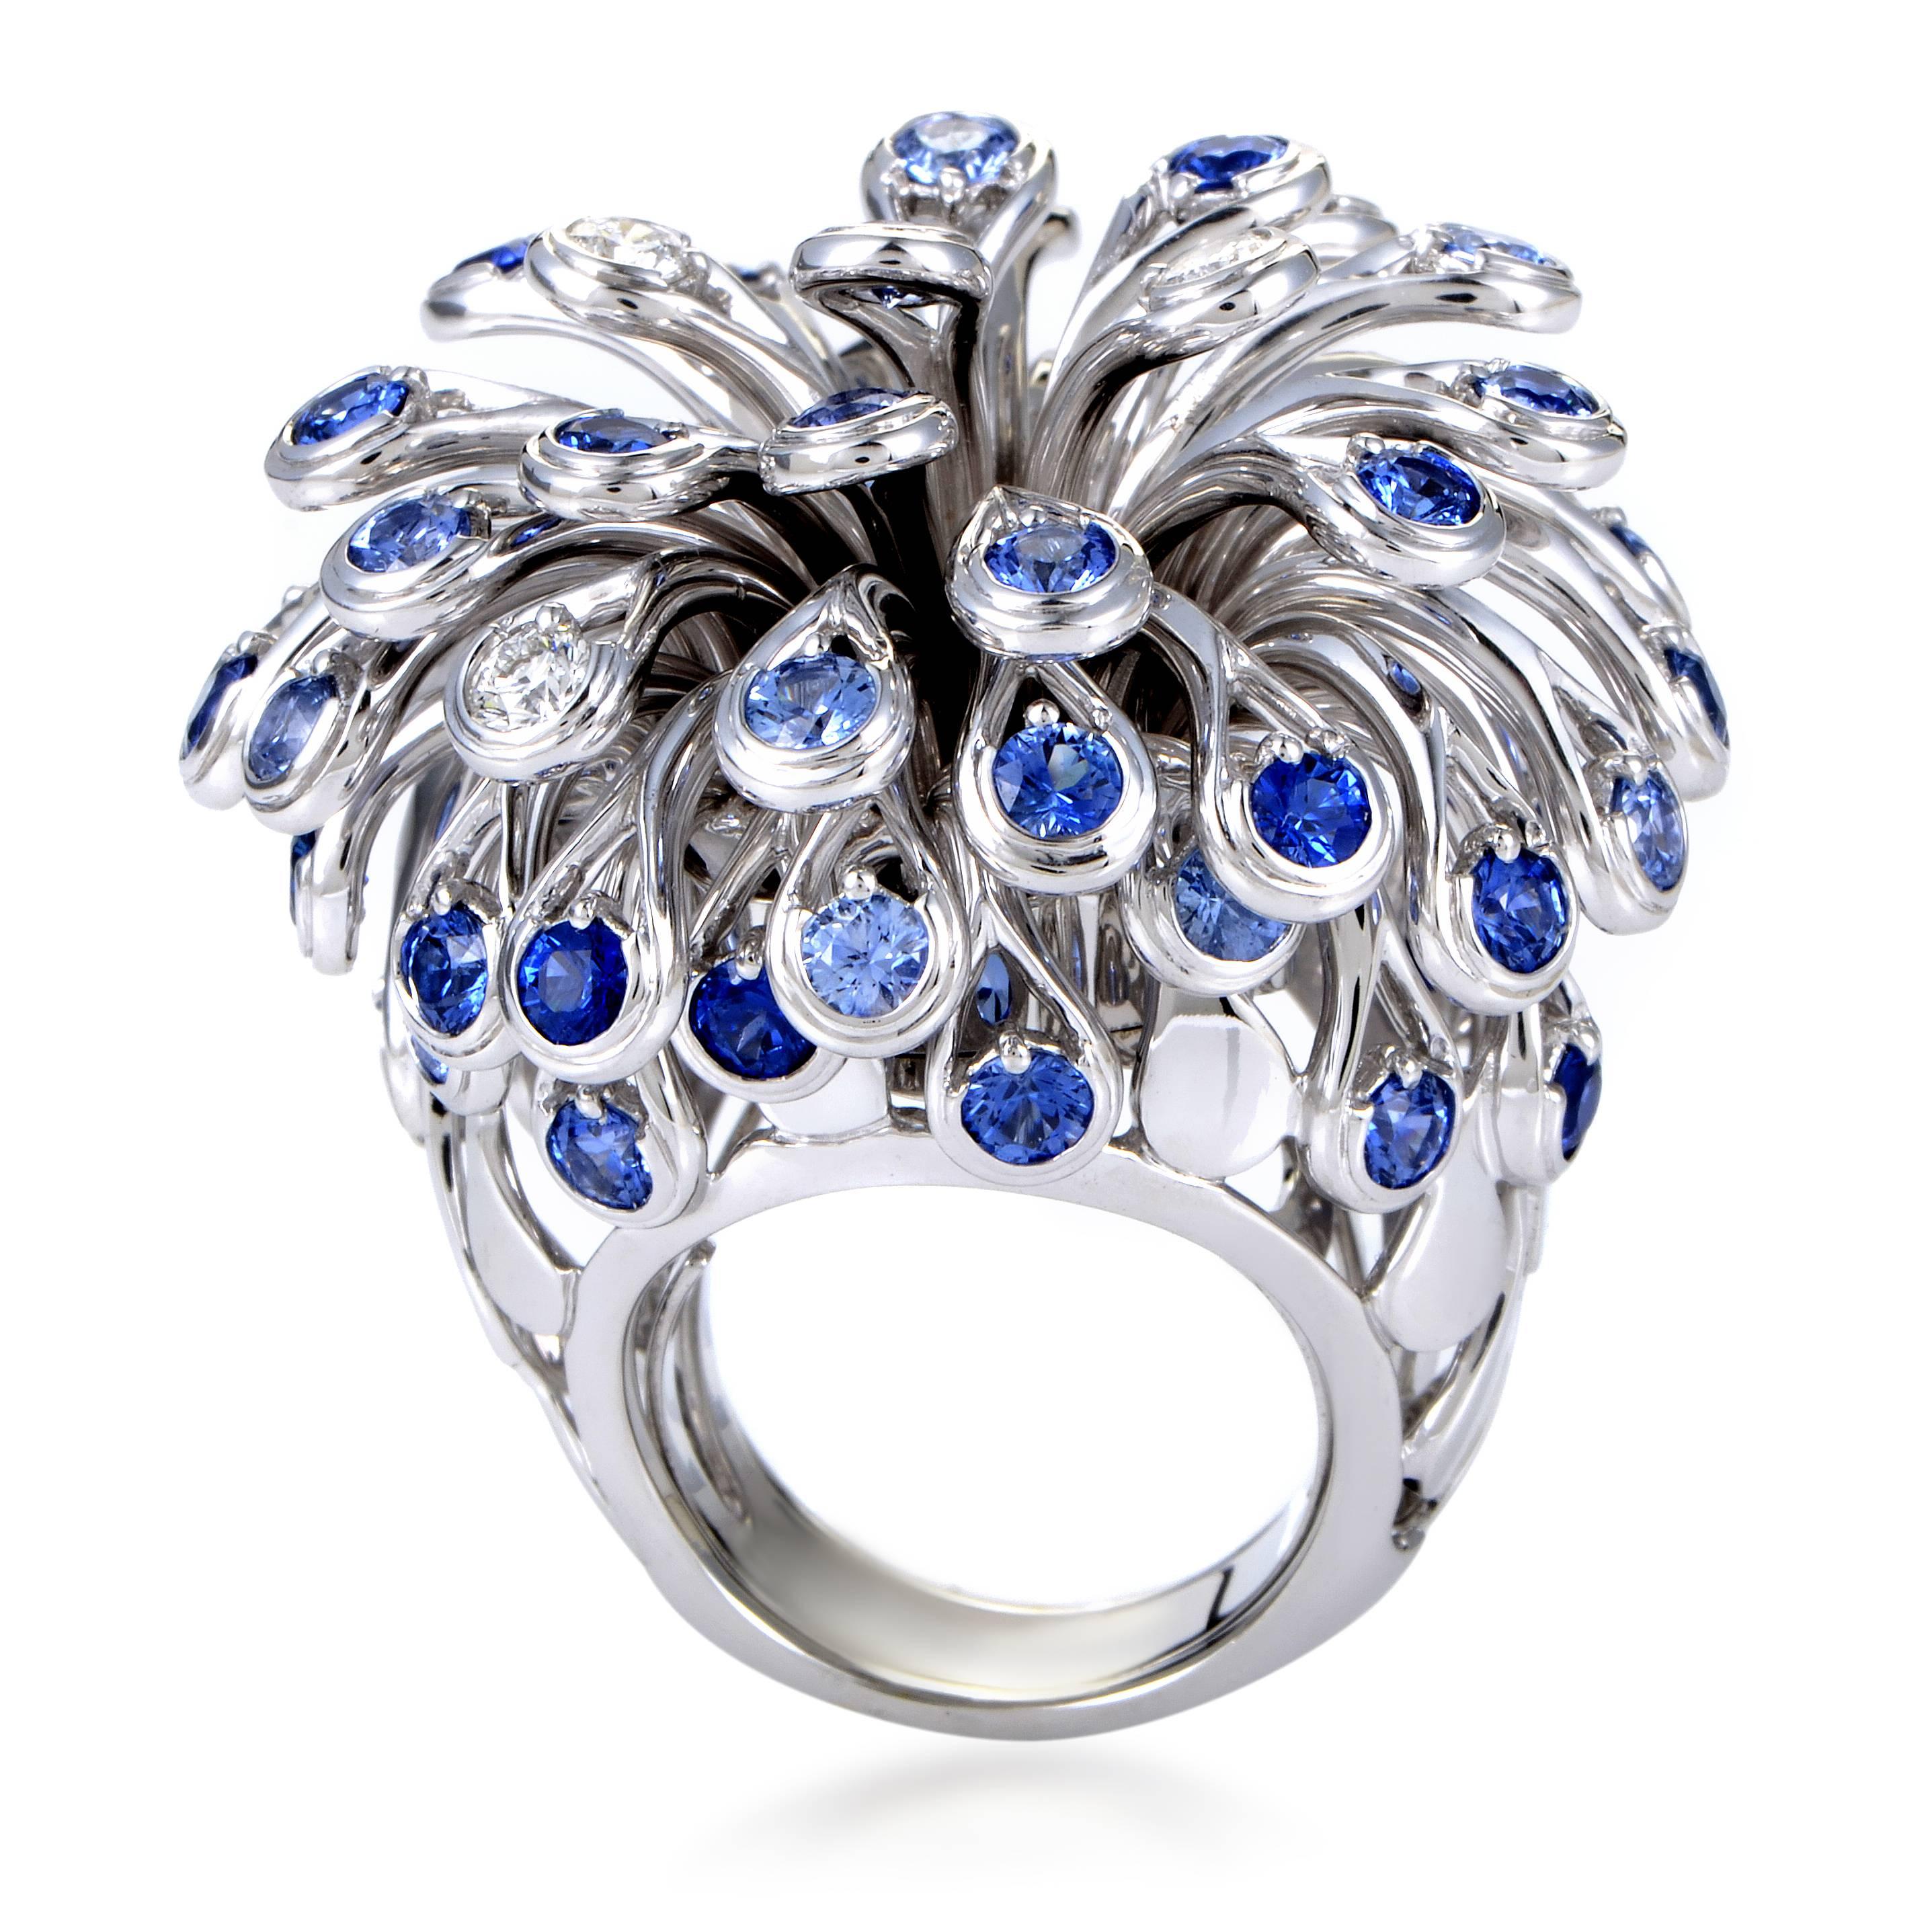 The majestic beauty of fireworks stripped down to its core and presented in an elegantly tasteful blend of prestigious 18K white gold and wonderful gems, this astonishing ring from Dior boasts 0.60ct of sparkling diamonds and 7.50 carats of